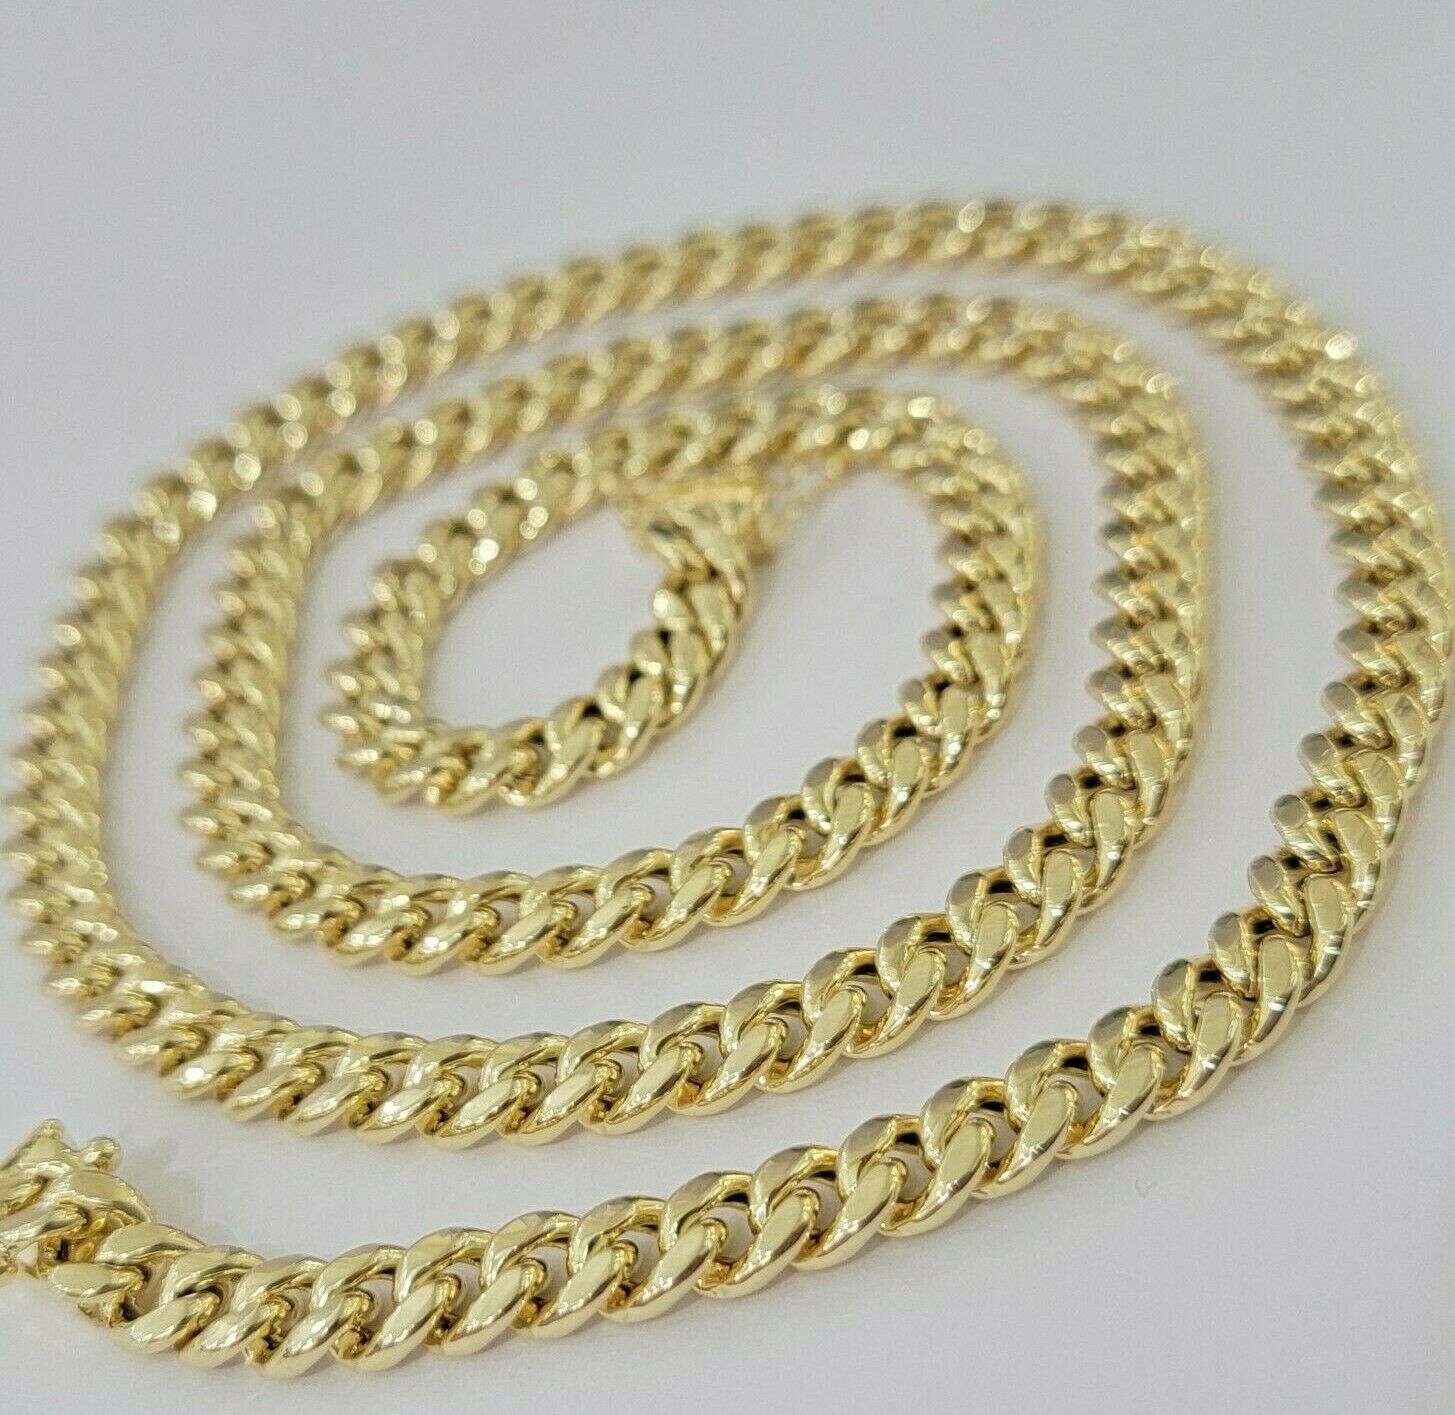 Real Gold Miami Cuban chain Necklace 7mm 22 Inch Lobster ,Men's 10kt Yellow Gold